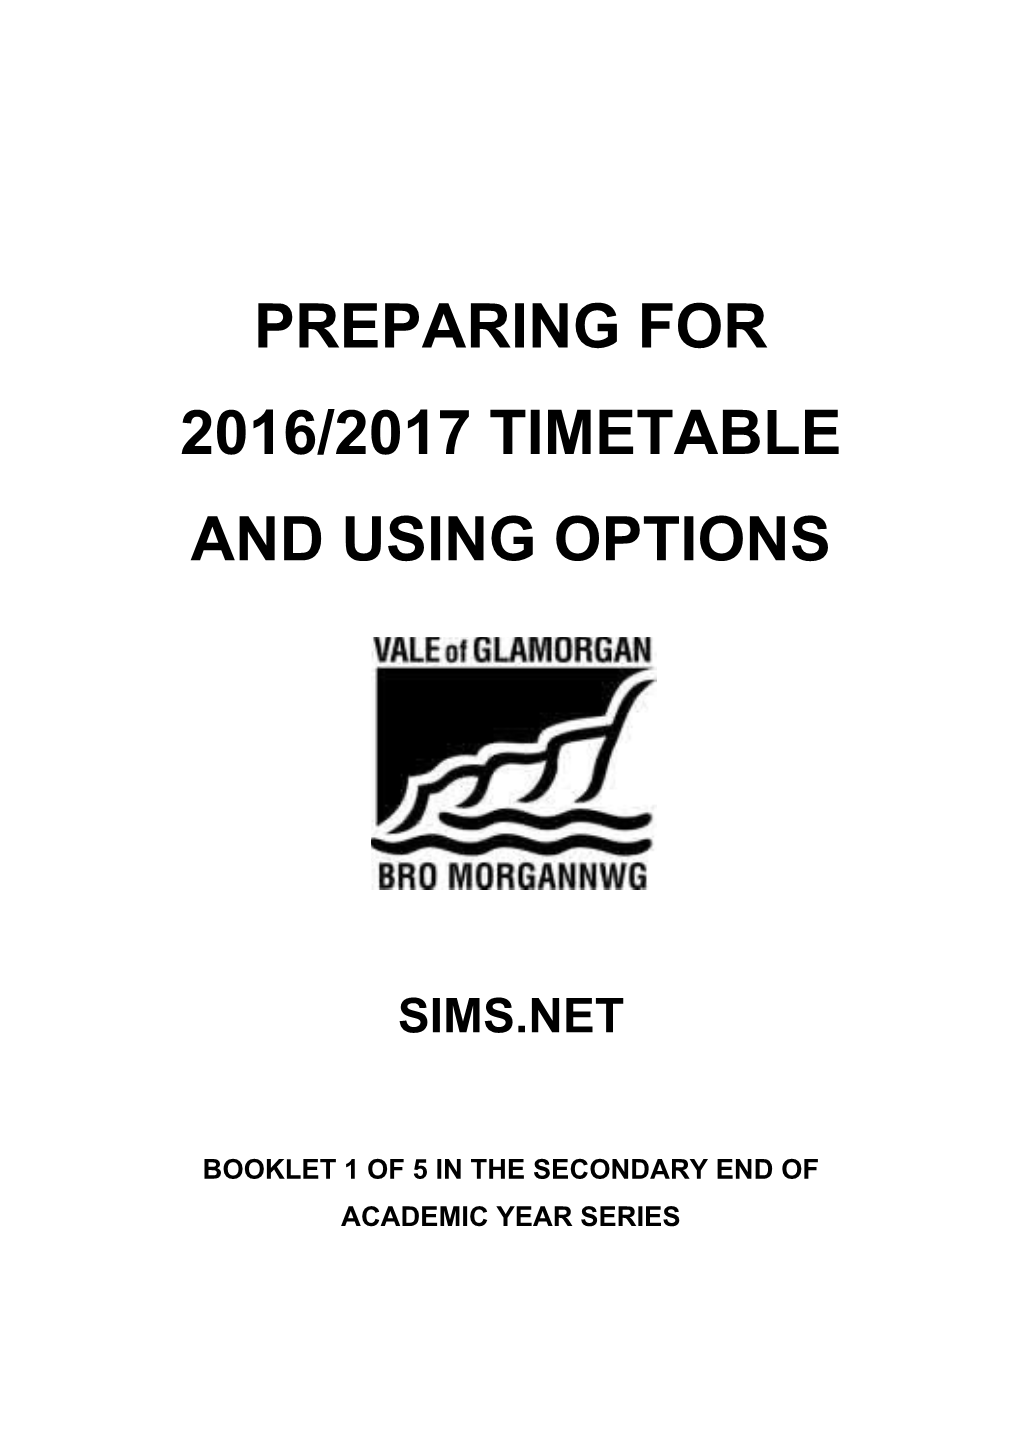 Preparing for 2016/2017 Timetable and Using Options